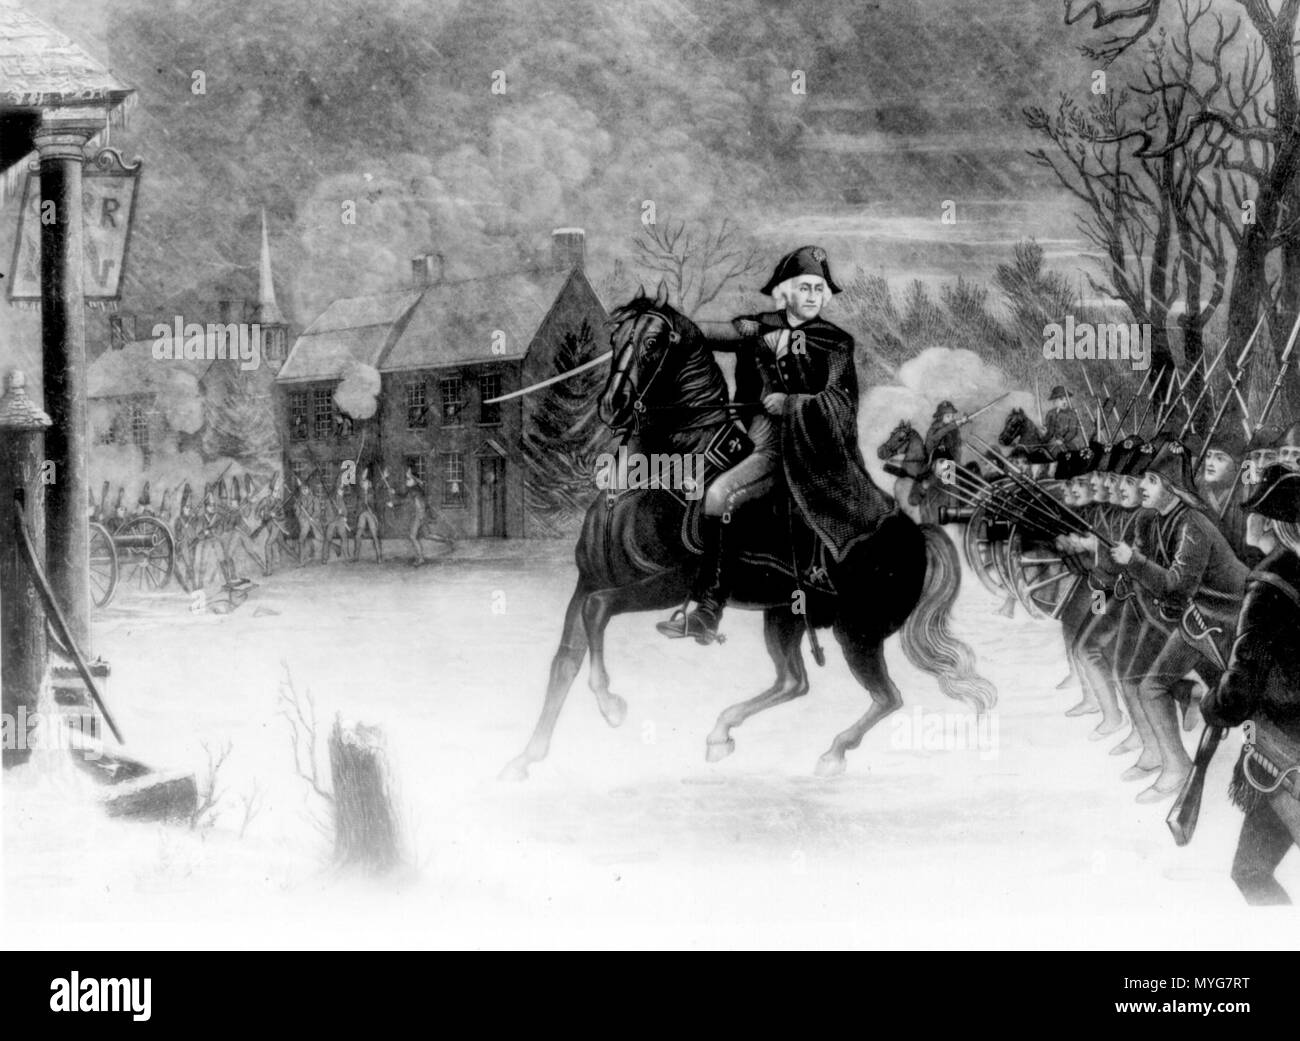 . Washington at the Battle of Trenton. An engraving by Illman Brothers. From painting by E.L. Henry. 1870. Illman Brothers from painting by   Edward Lamson Henry  (1841–1919)    Alternative names E. L. Henry; Edward Henry; Edward Lawson Henry; Eduard Lamson Henry; E.L. Henry; henry edward lamson; Henry  Description American painter  Date of birth/death 12 January 1841 9 May 1919  Location of birth Charleston  Authority control  : Q2605527 VIAF: 812204 ISNI: 0000 0000 8080 6389 ULAN: 500006188 LCCN: n87932413 NLA: 35755797 WorldCat 237 Henry-revolutionary-war Stock Photo